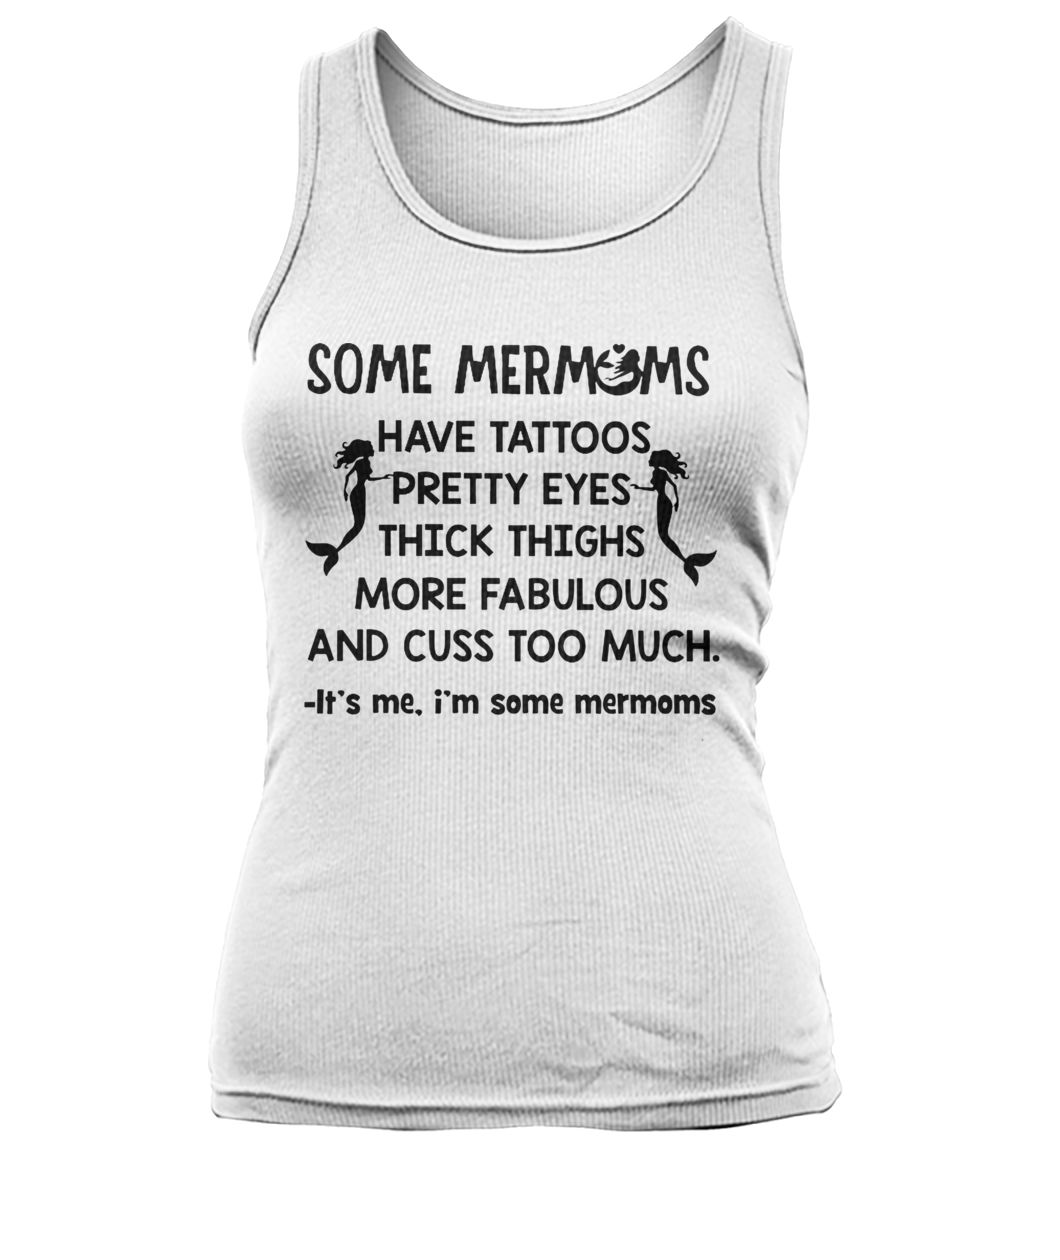 Some mermoms have tattoos pretty eyes thick thights more fabulous and cuss too much women's tank top